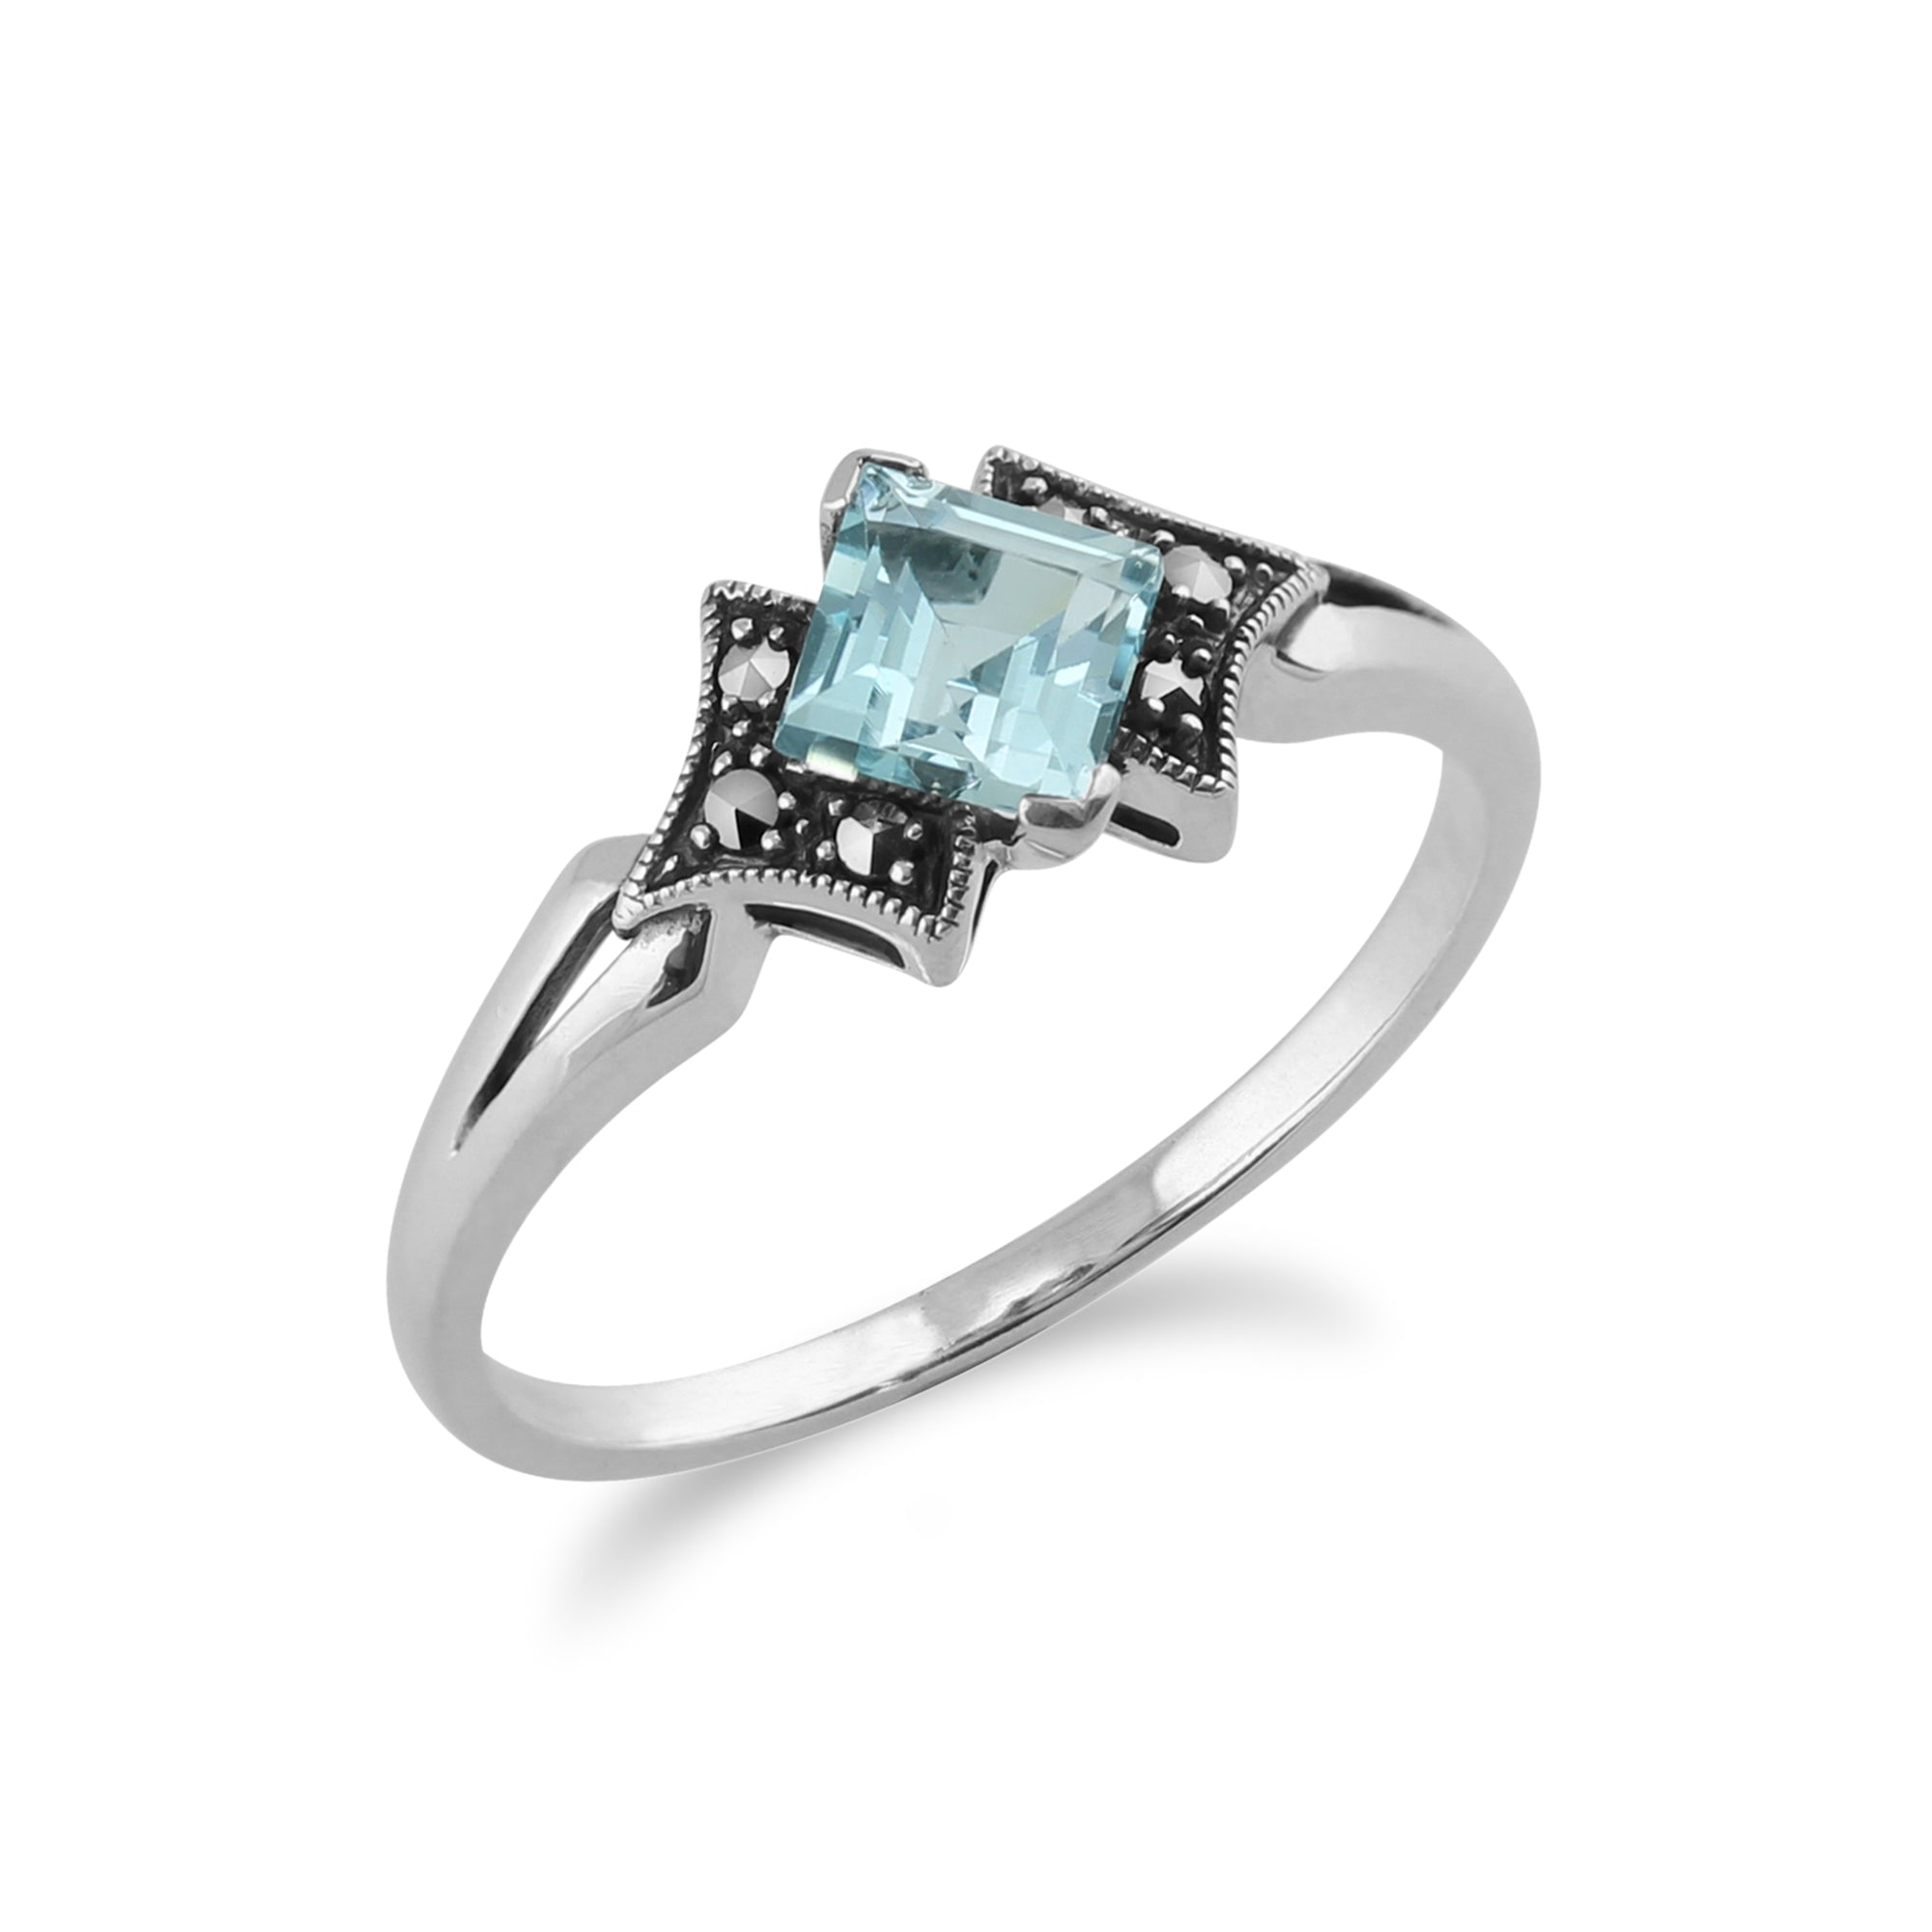 214R393301925 Art Deco Style Square Blue Topaz & Marcasite Ring in 925 Sterling Silver 2